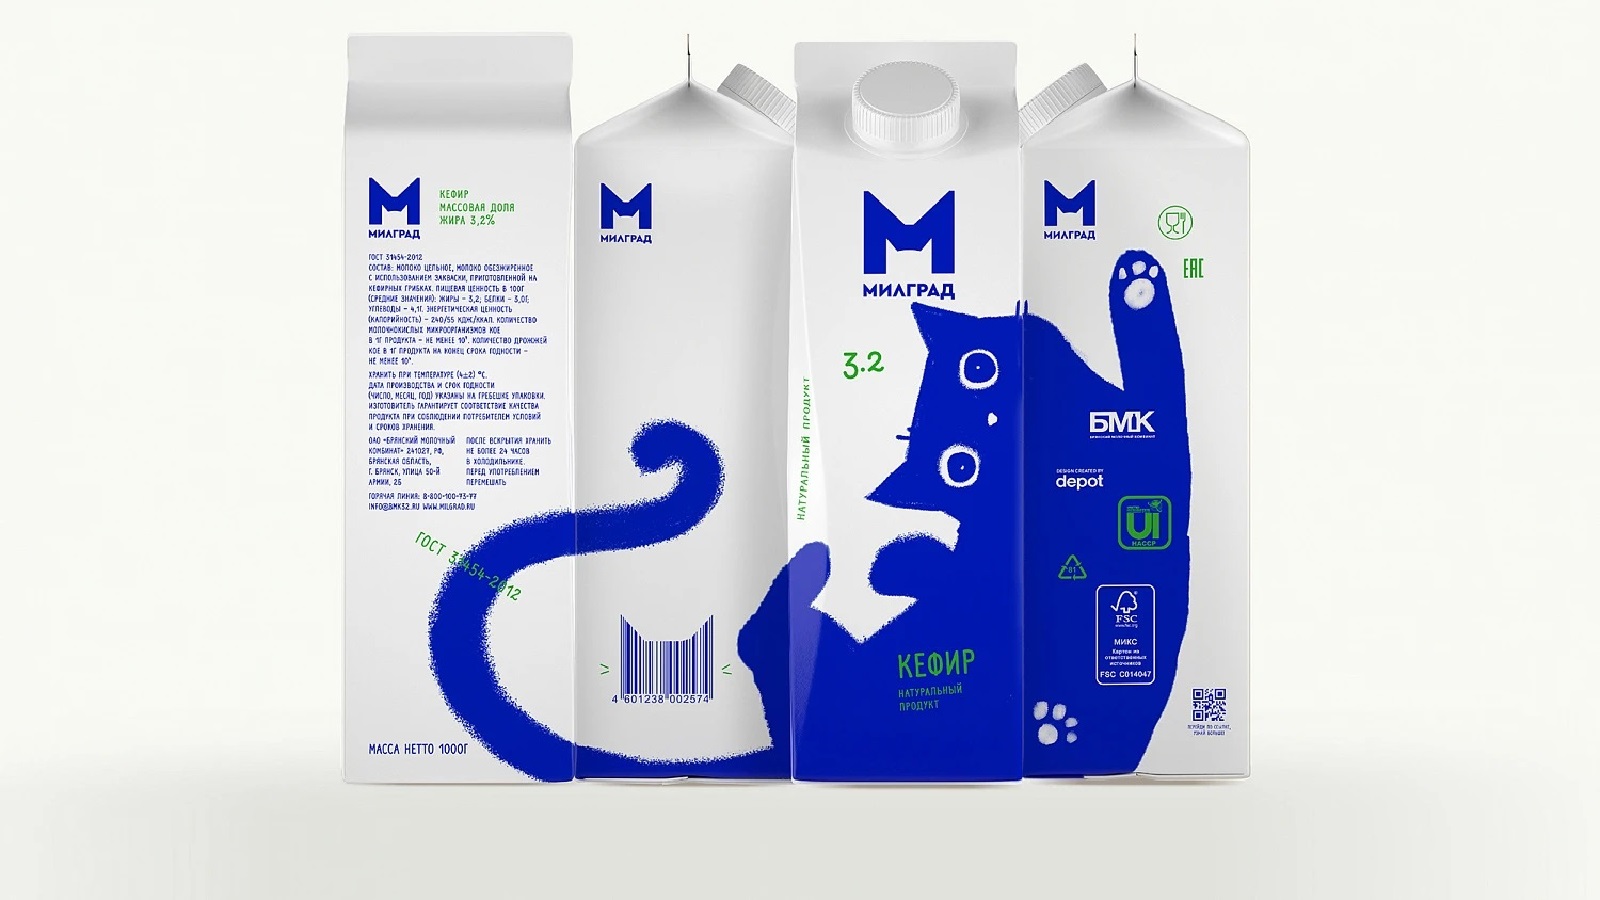 #TBT: Interactive Packaging Shows the Cute Habits of a Curious Cat